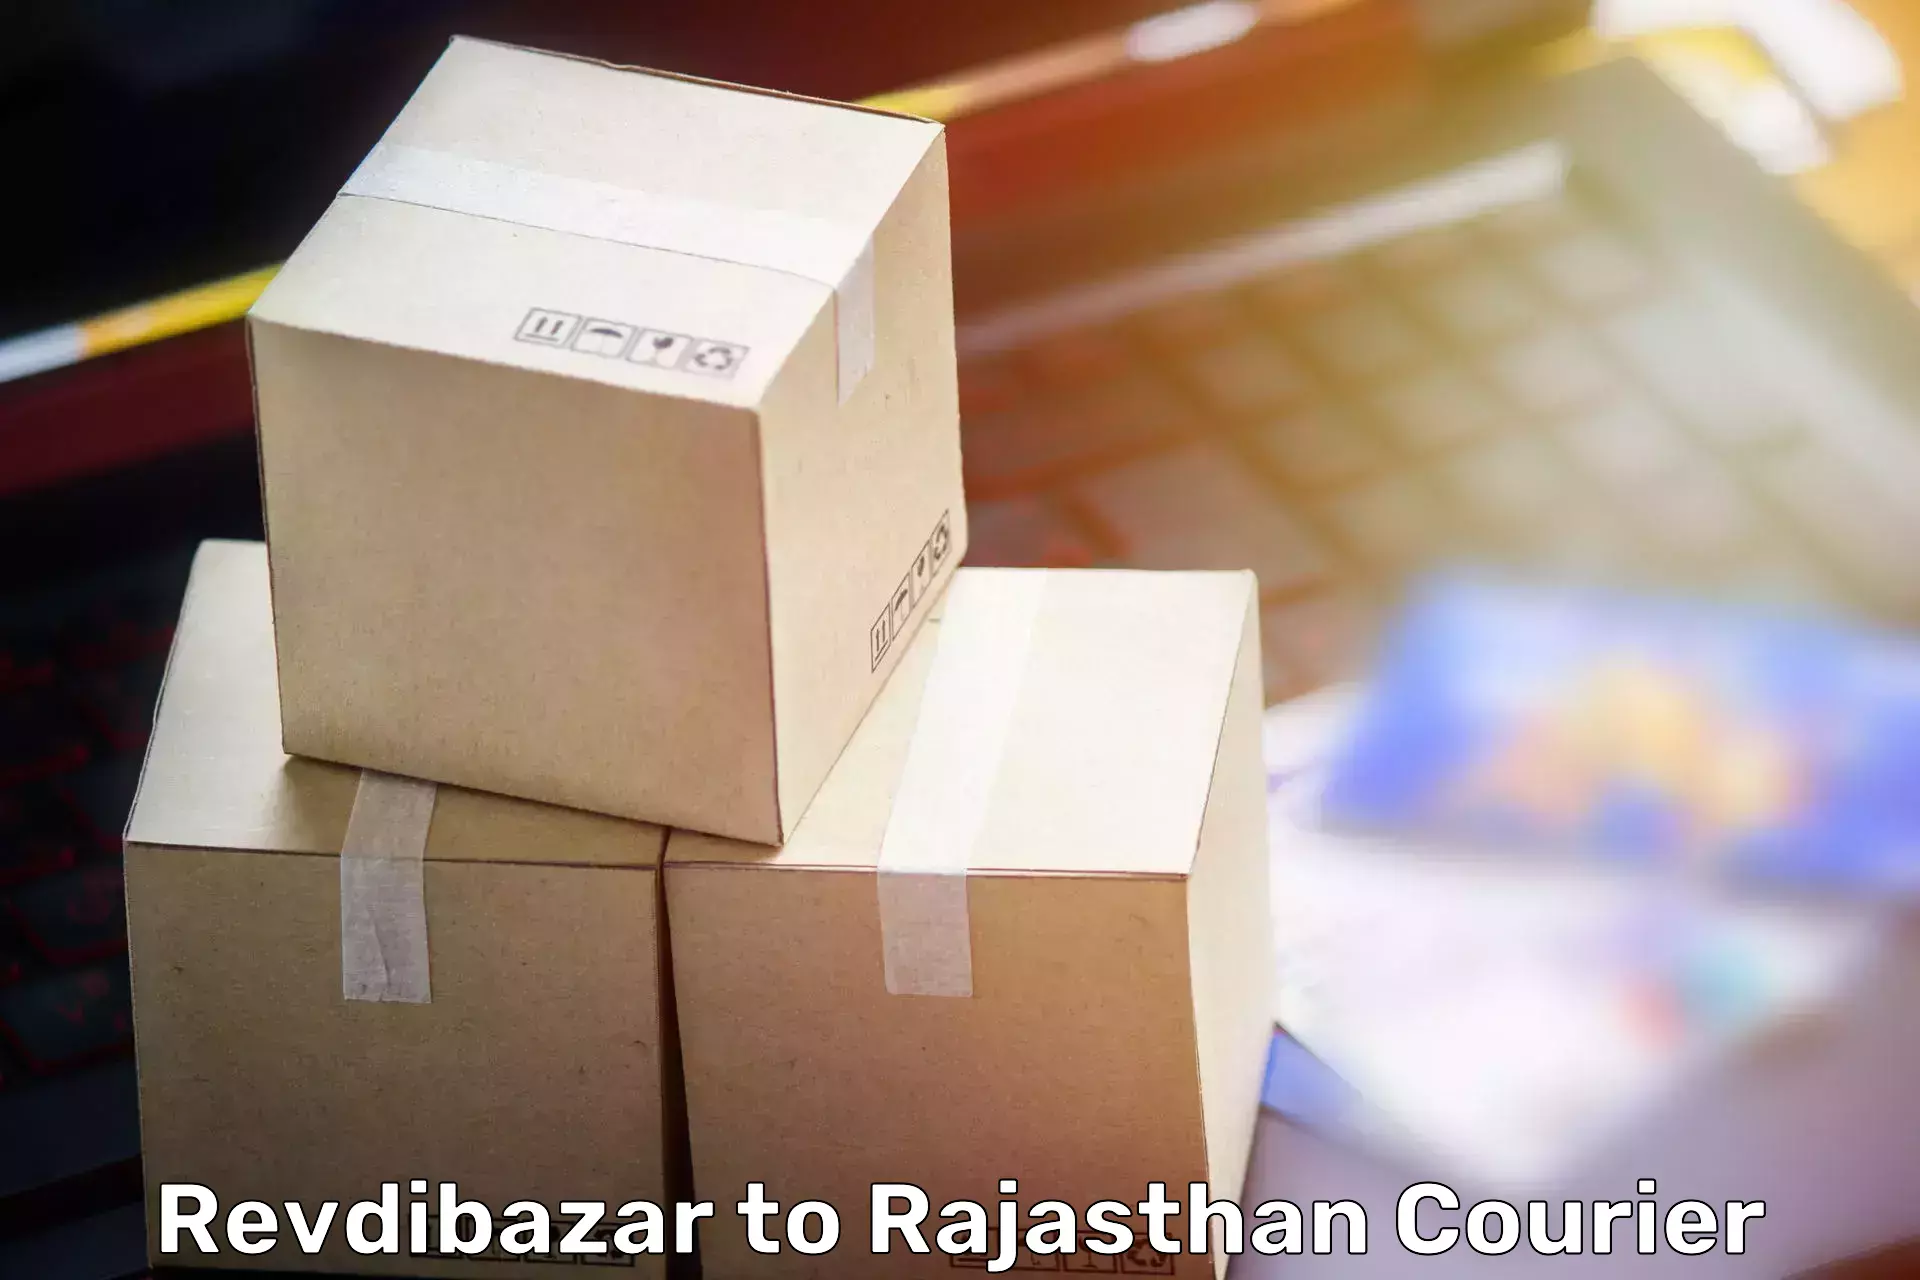 Hassle-free relocation Revdibazar to Dudu